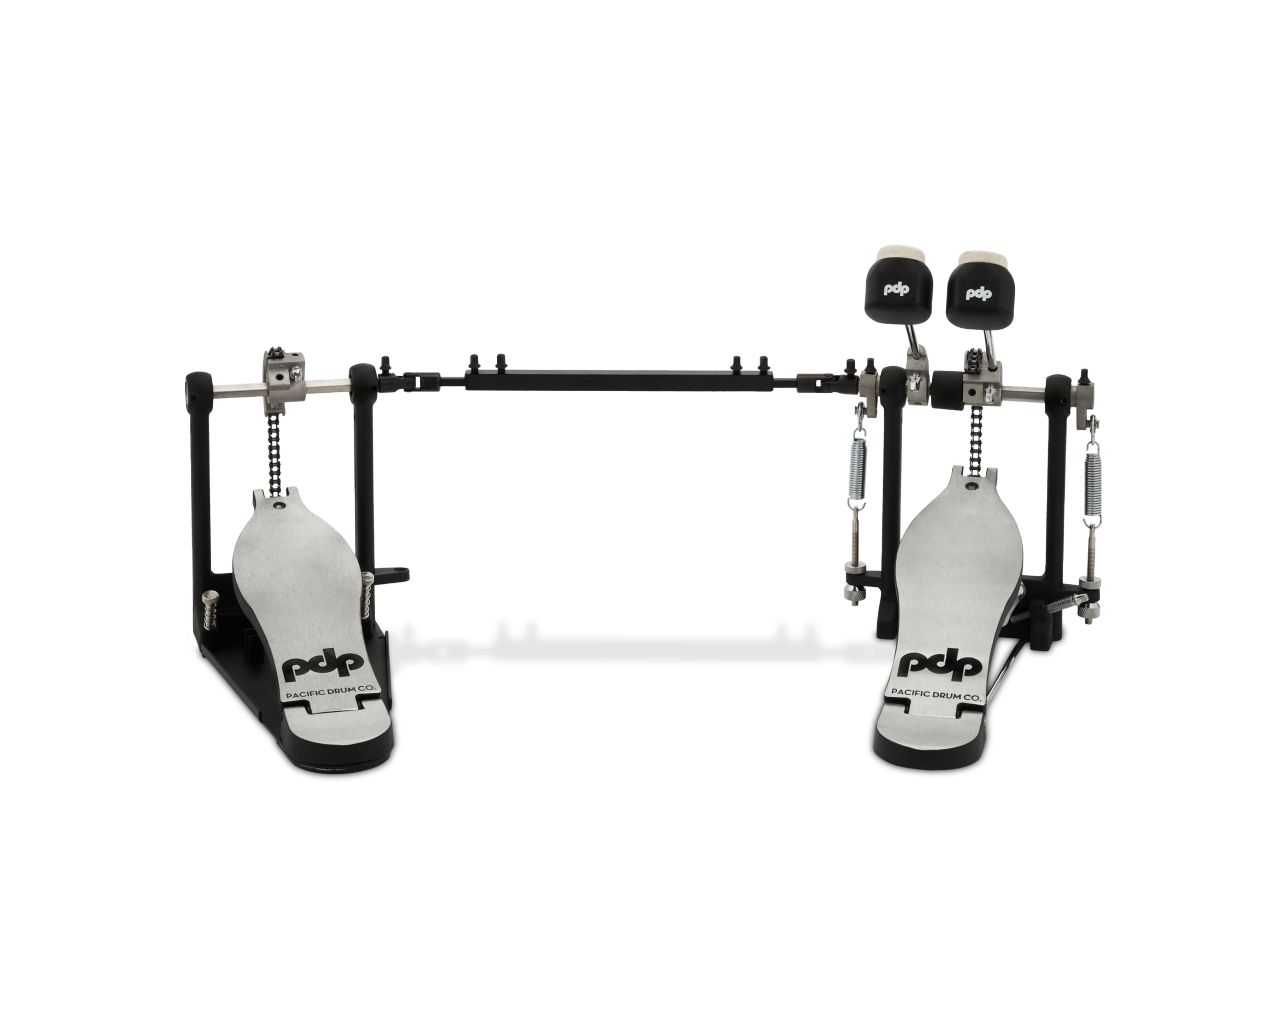 PDP BY DW 700 SERIES DOUBLE PEDAL PDDP712 